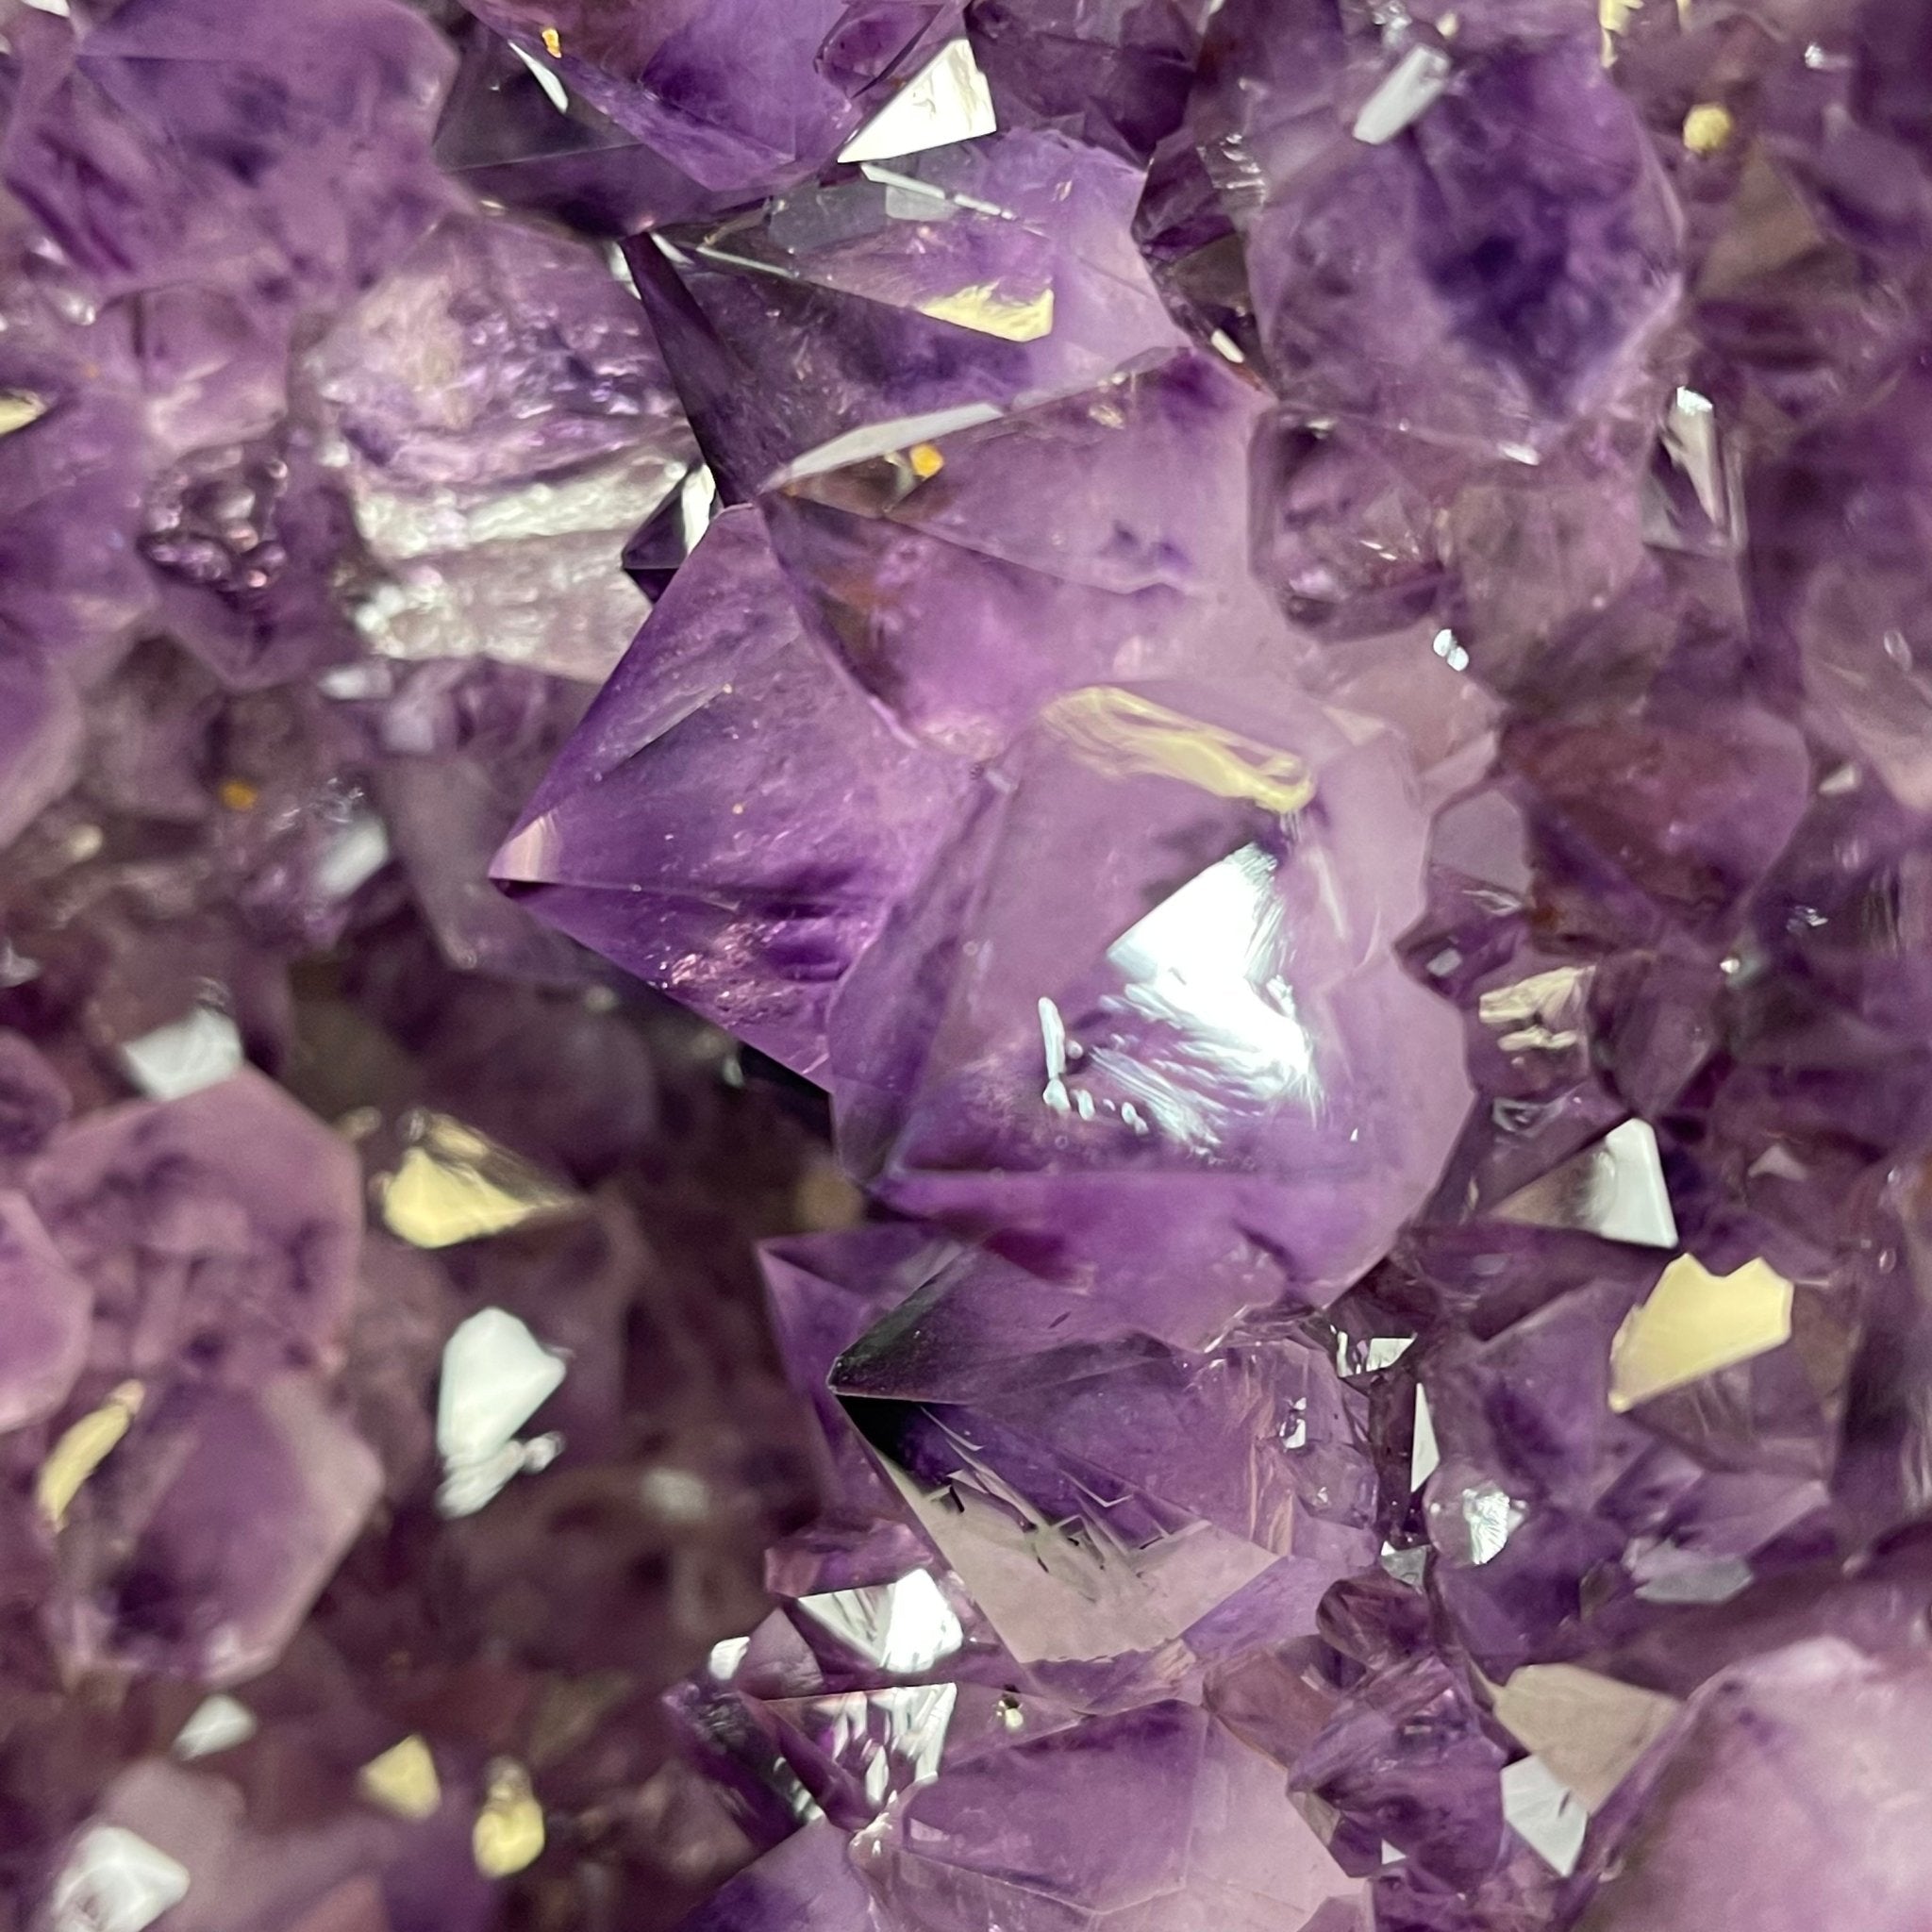 Super Quality Brazilian Amethyst Cathedral, 49.3 lbs & 22.5" Tall #5601-1047 by Brazil Gems - Brazil GemsBrazil GemsSuper Quality Brazilian Amethyst Cathedral, 49.3 lbs & 22.5" Tall #5601-1047 by Brazil GemsCathedrals5601-1047